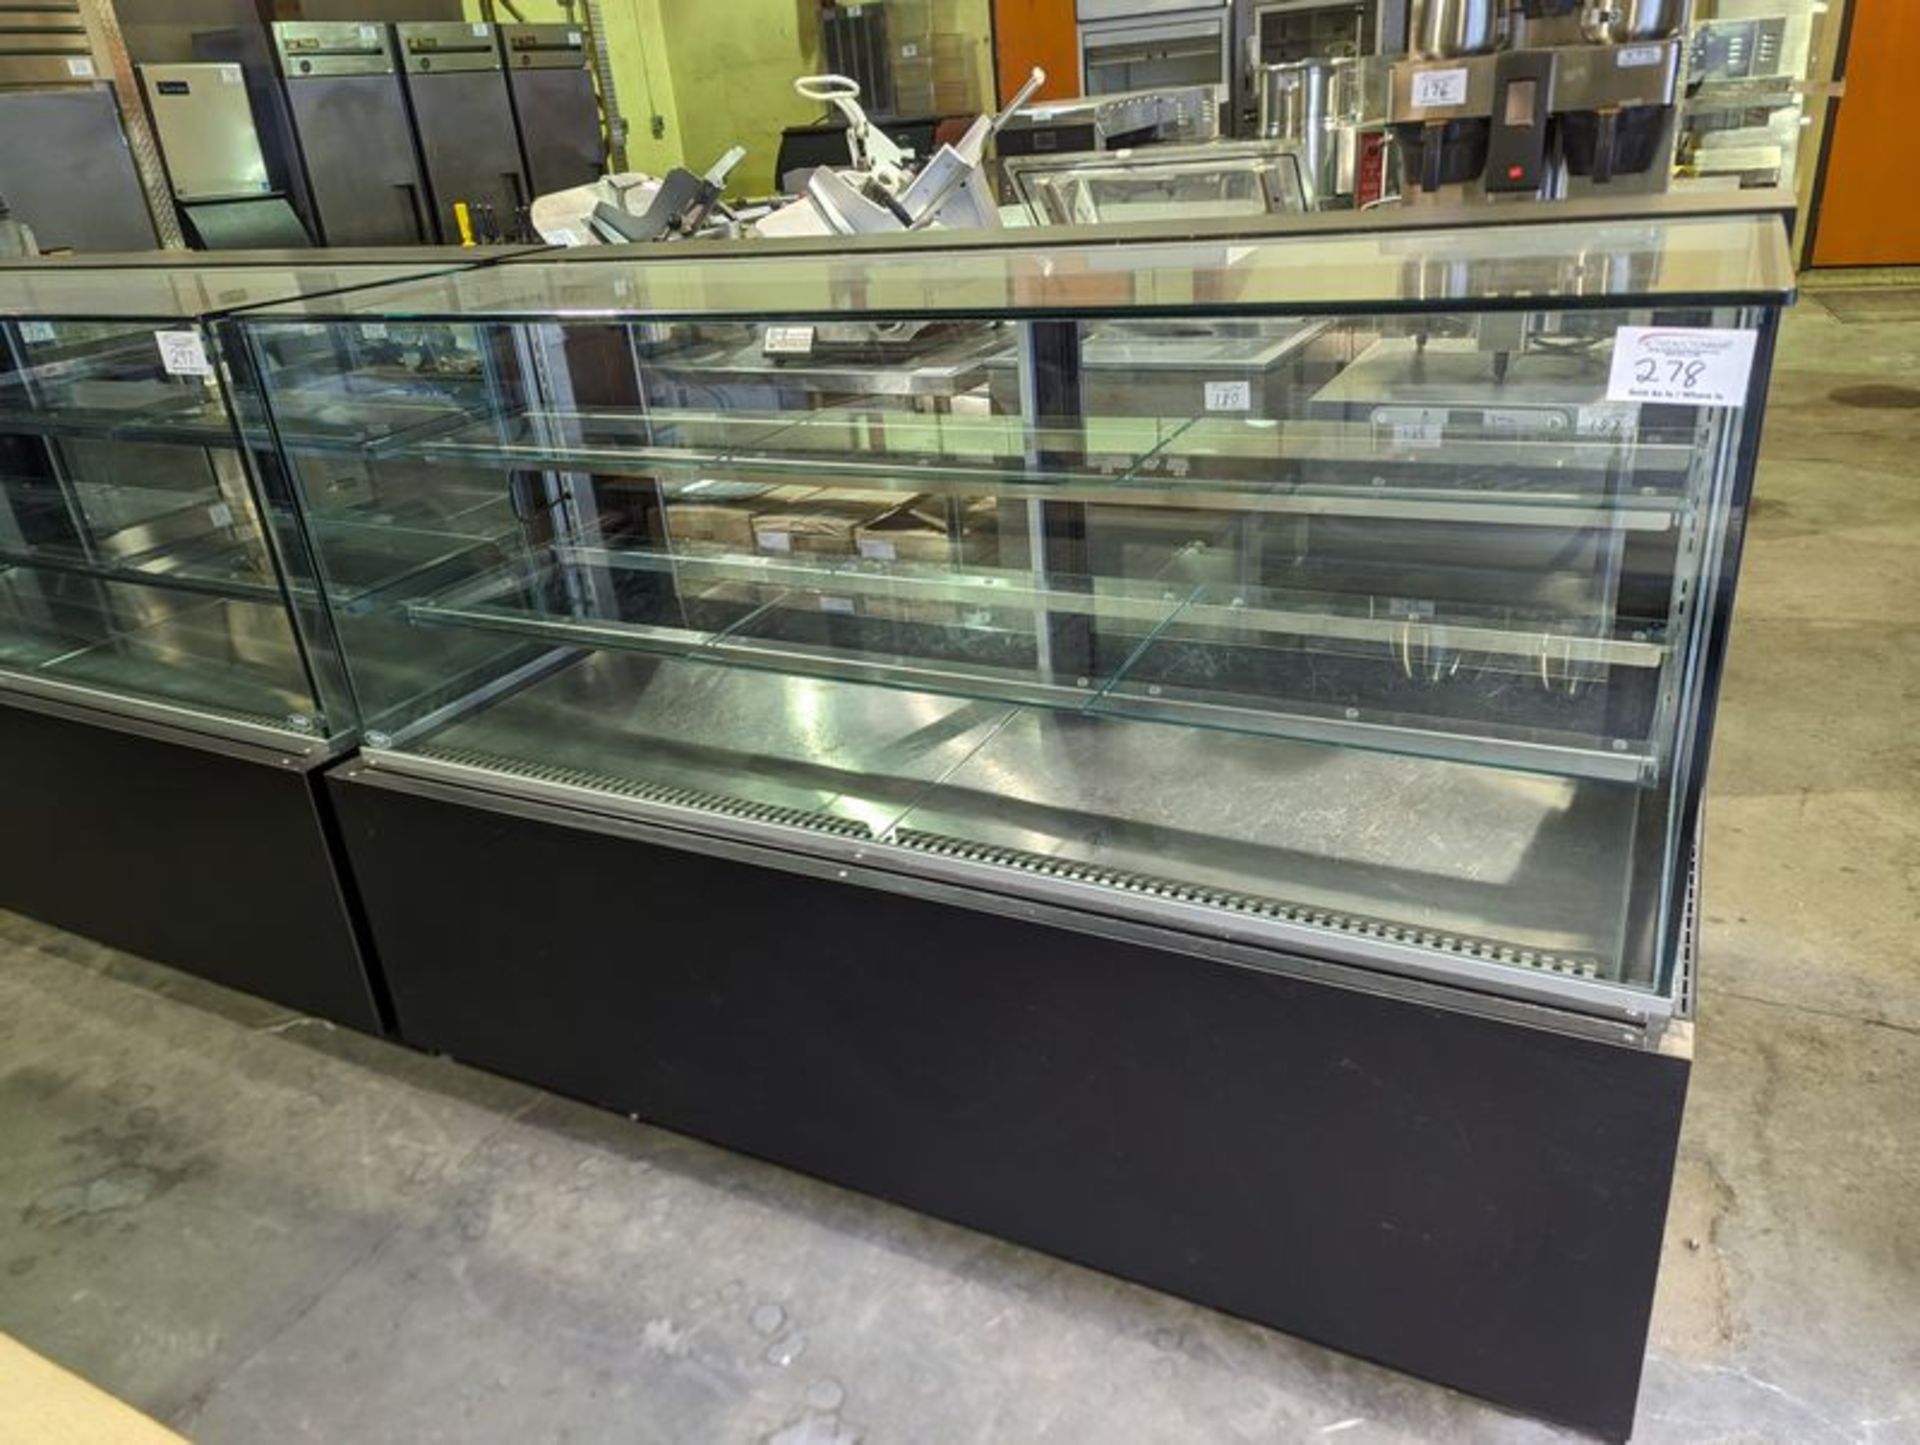 6 ft CDS Refrigerated Pastry Cooler - Purchased New, Used 1 Year, New Cost $11,850.00